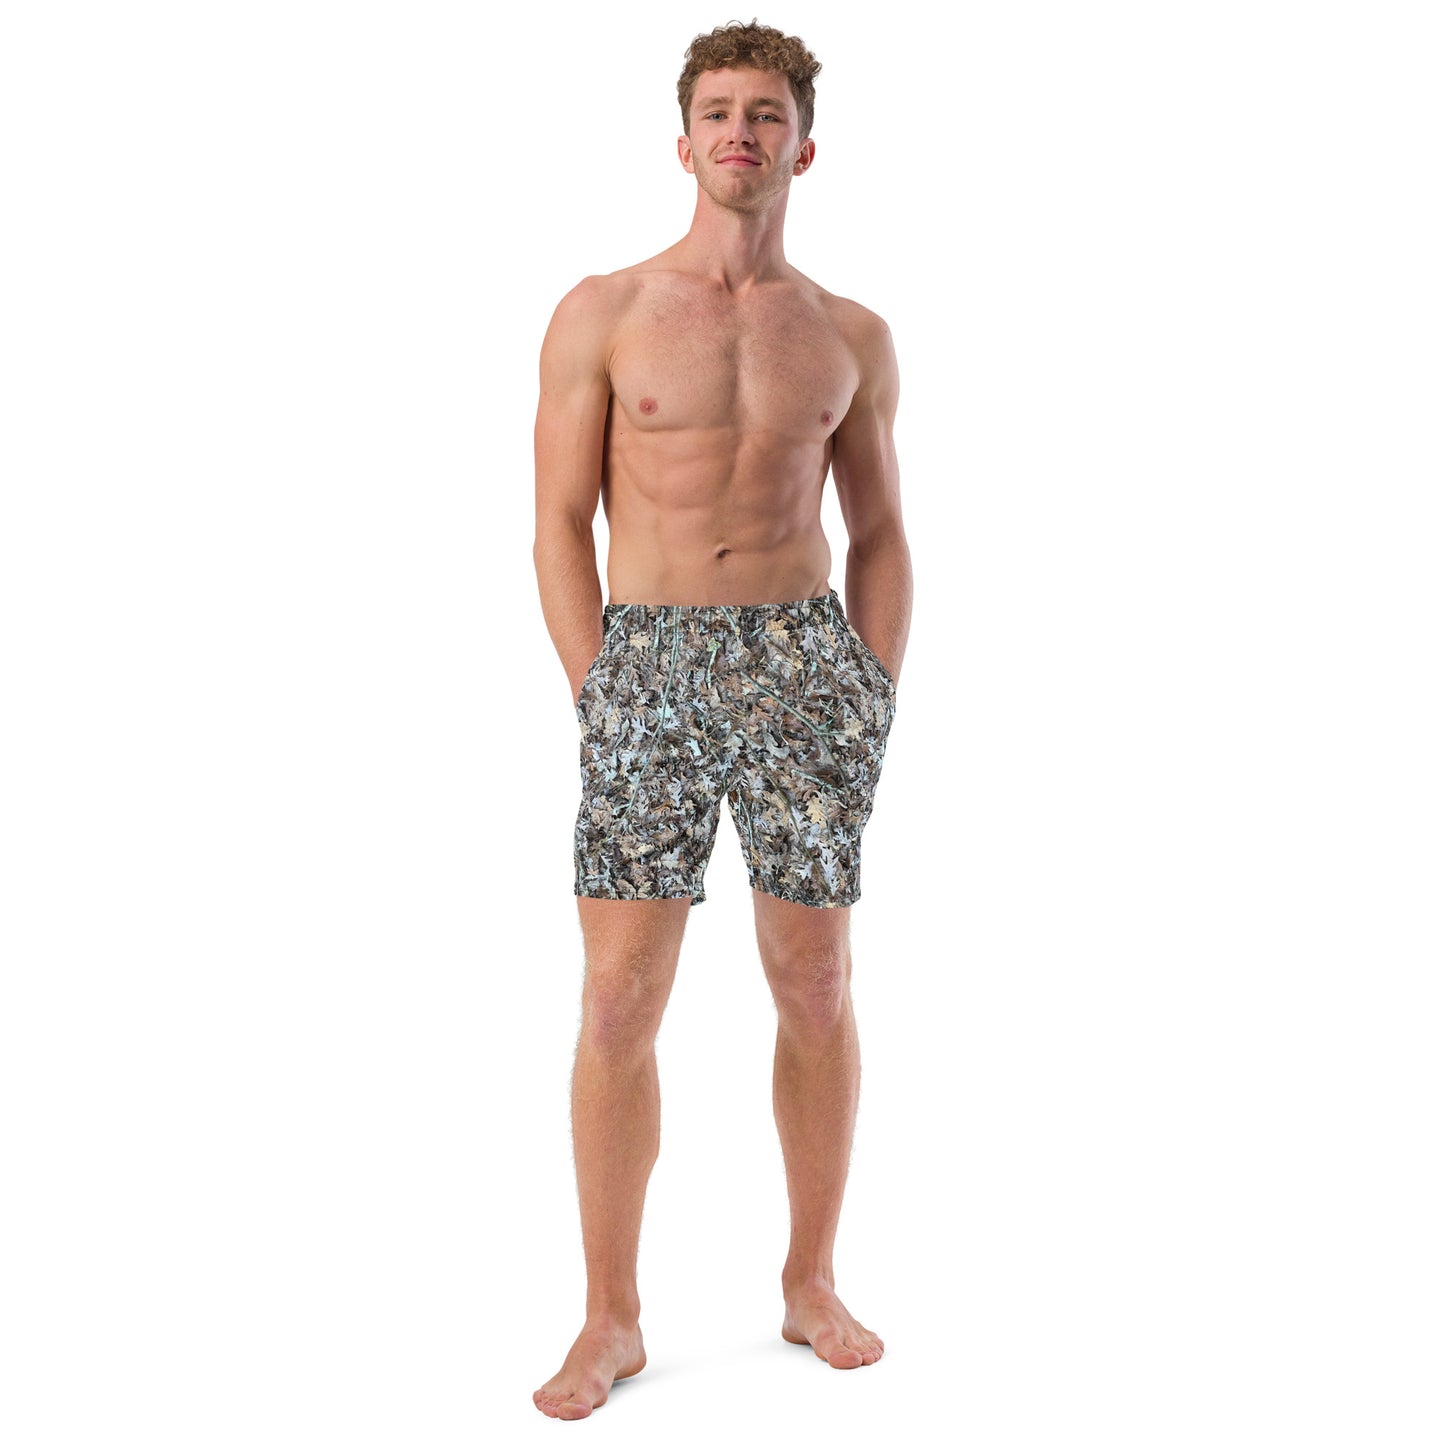 Southern Cameaux Ground Cover Men's swim trunks